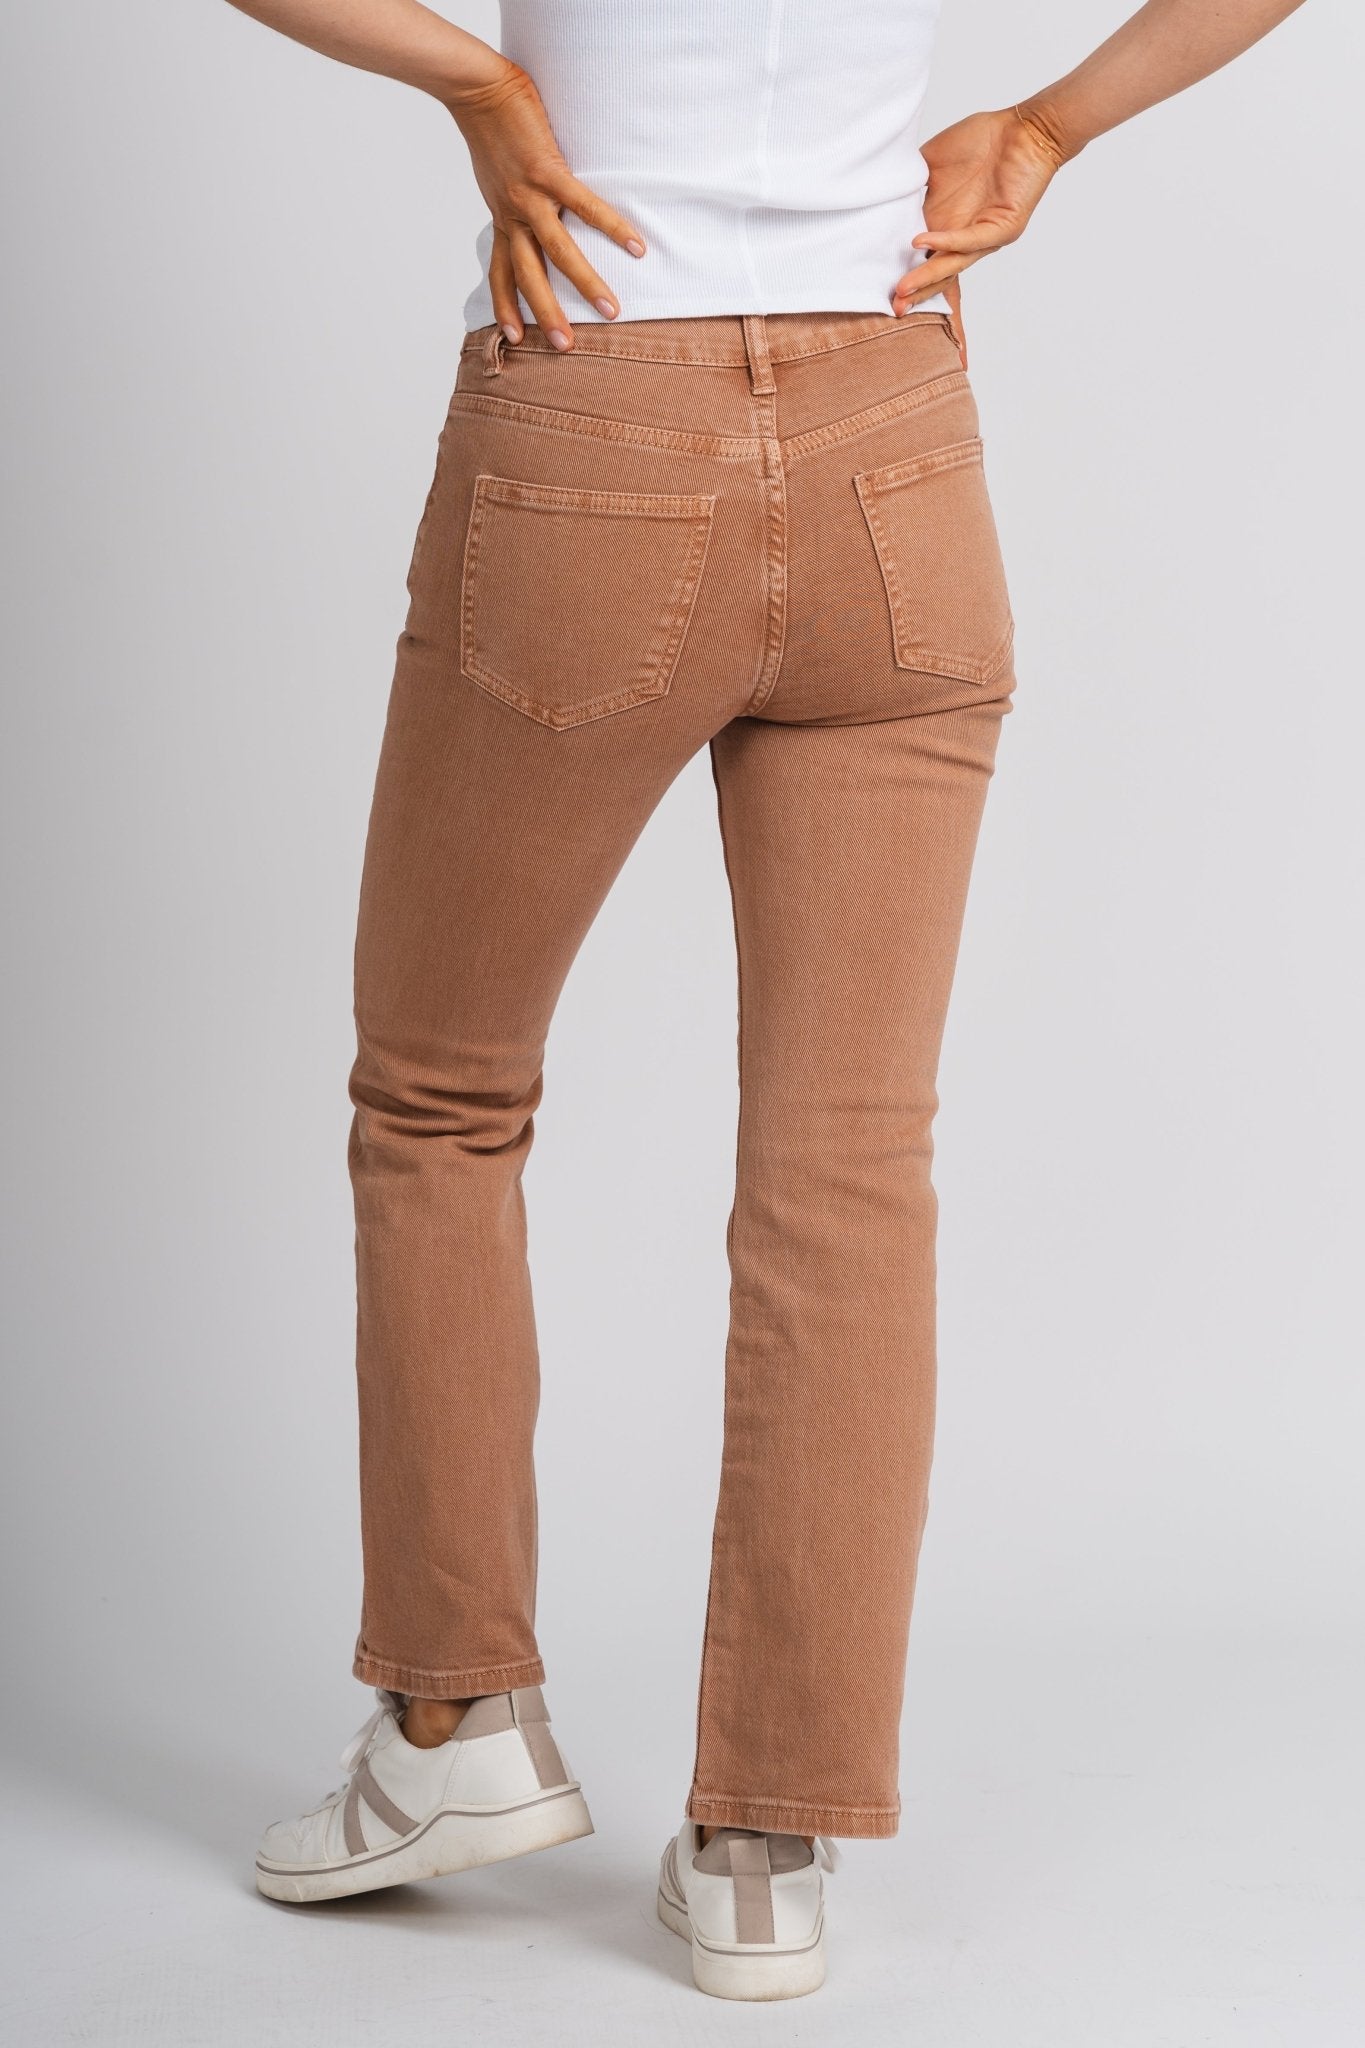 High waist flare jeans camel | Lush Fashion Lounge: boutique women's jeans, fashion jeans for women, affordable fashion jeans, cute boutique jeans